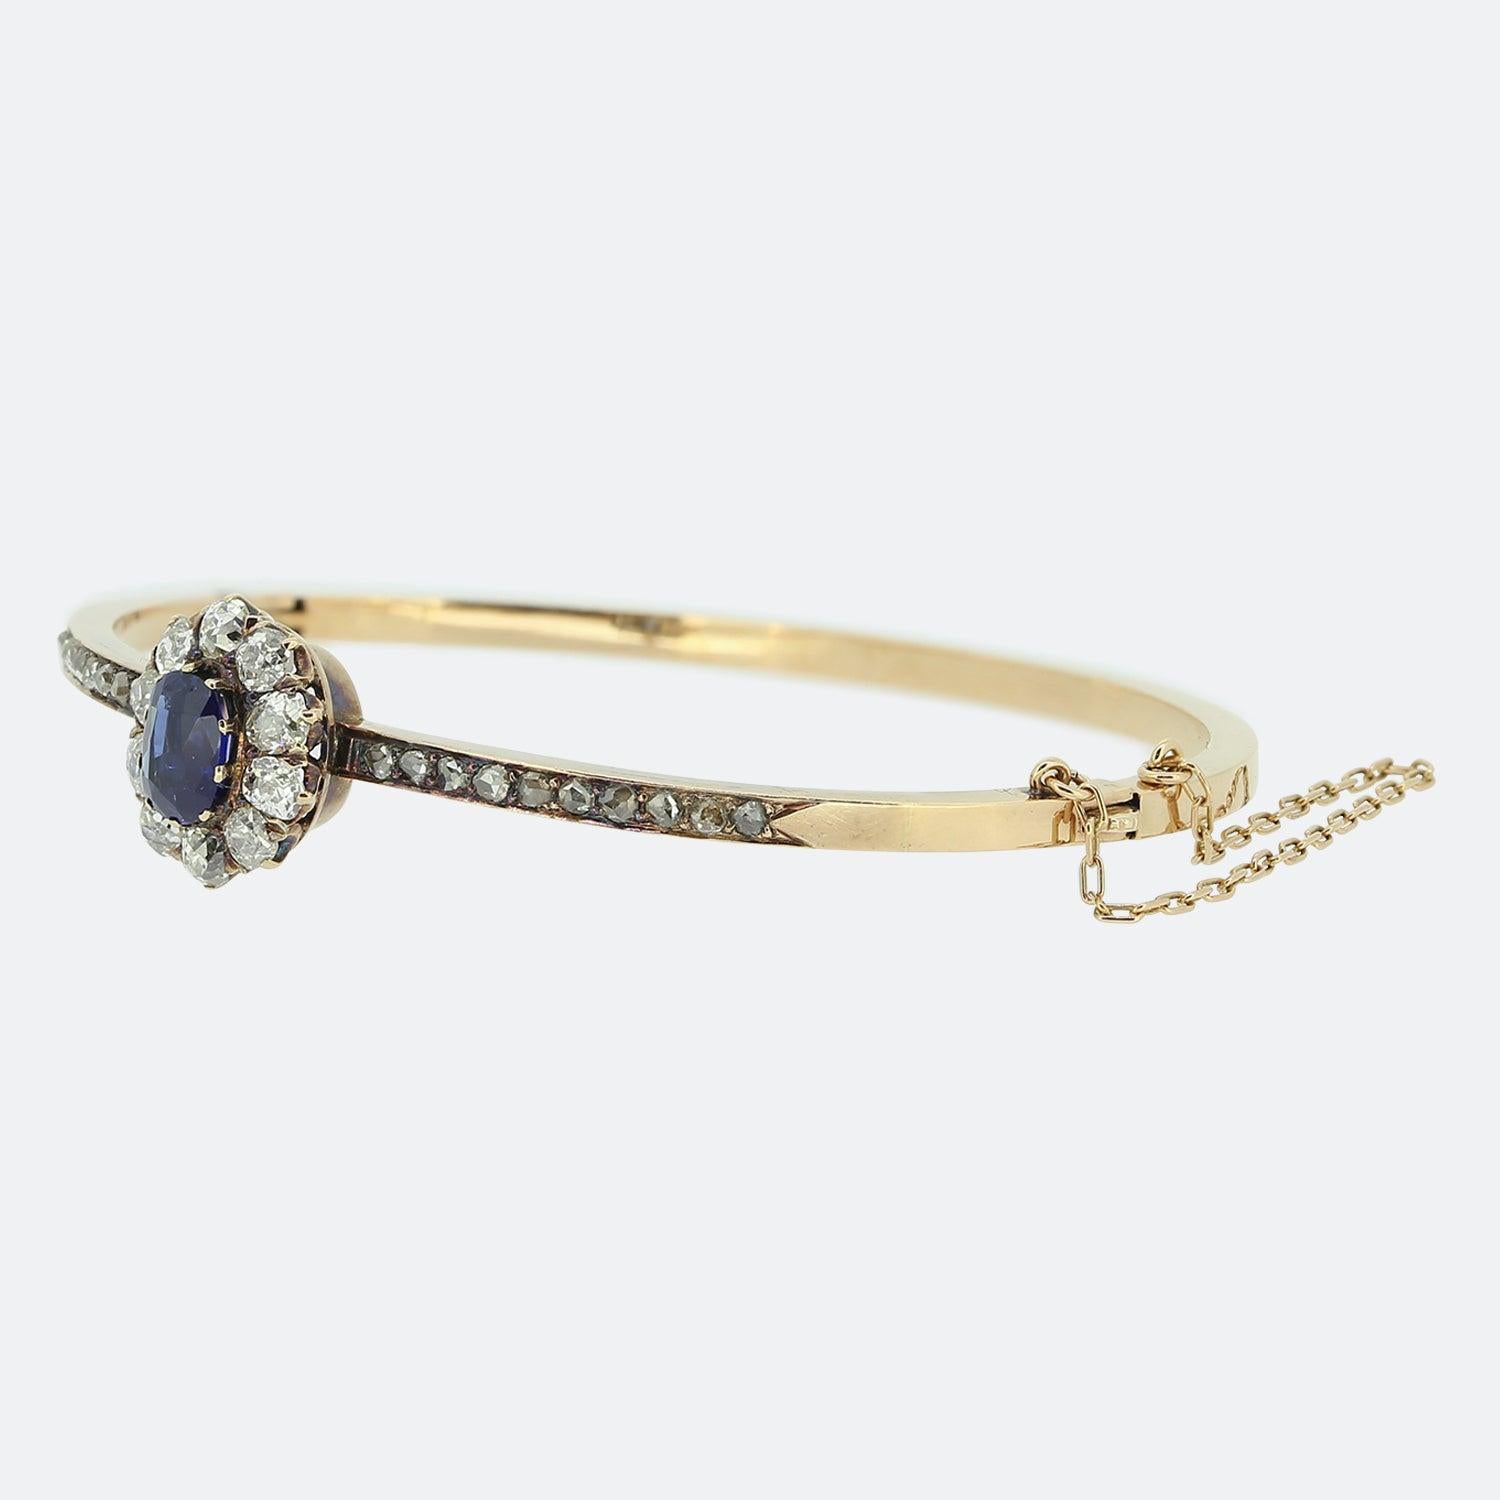 Here we have a marvellous sapphire and diamond bangle from the Victorian era. The focal point of the bangle is a stunning rich blue sapphire which is surrounded by 10 bright white old cut diamonds. The bangle is crafted in 15ct rose gold and each